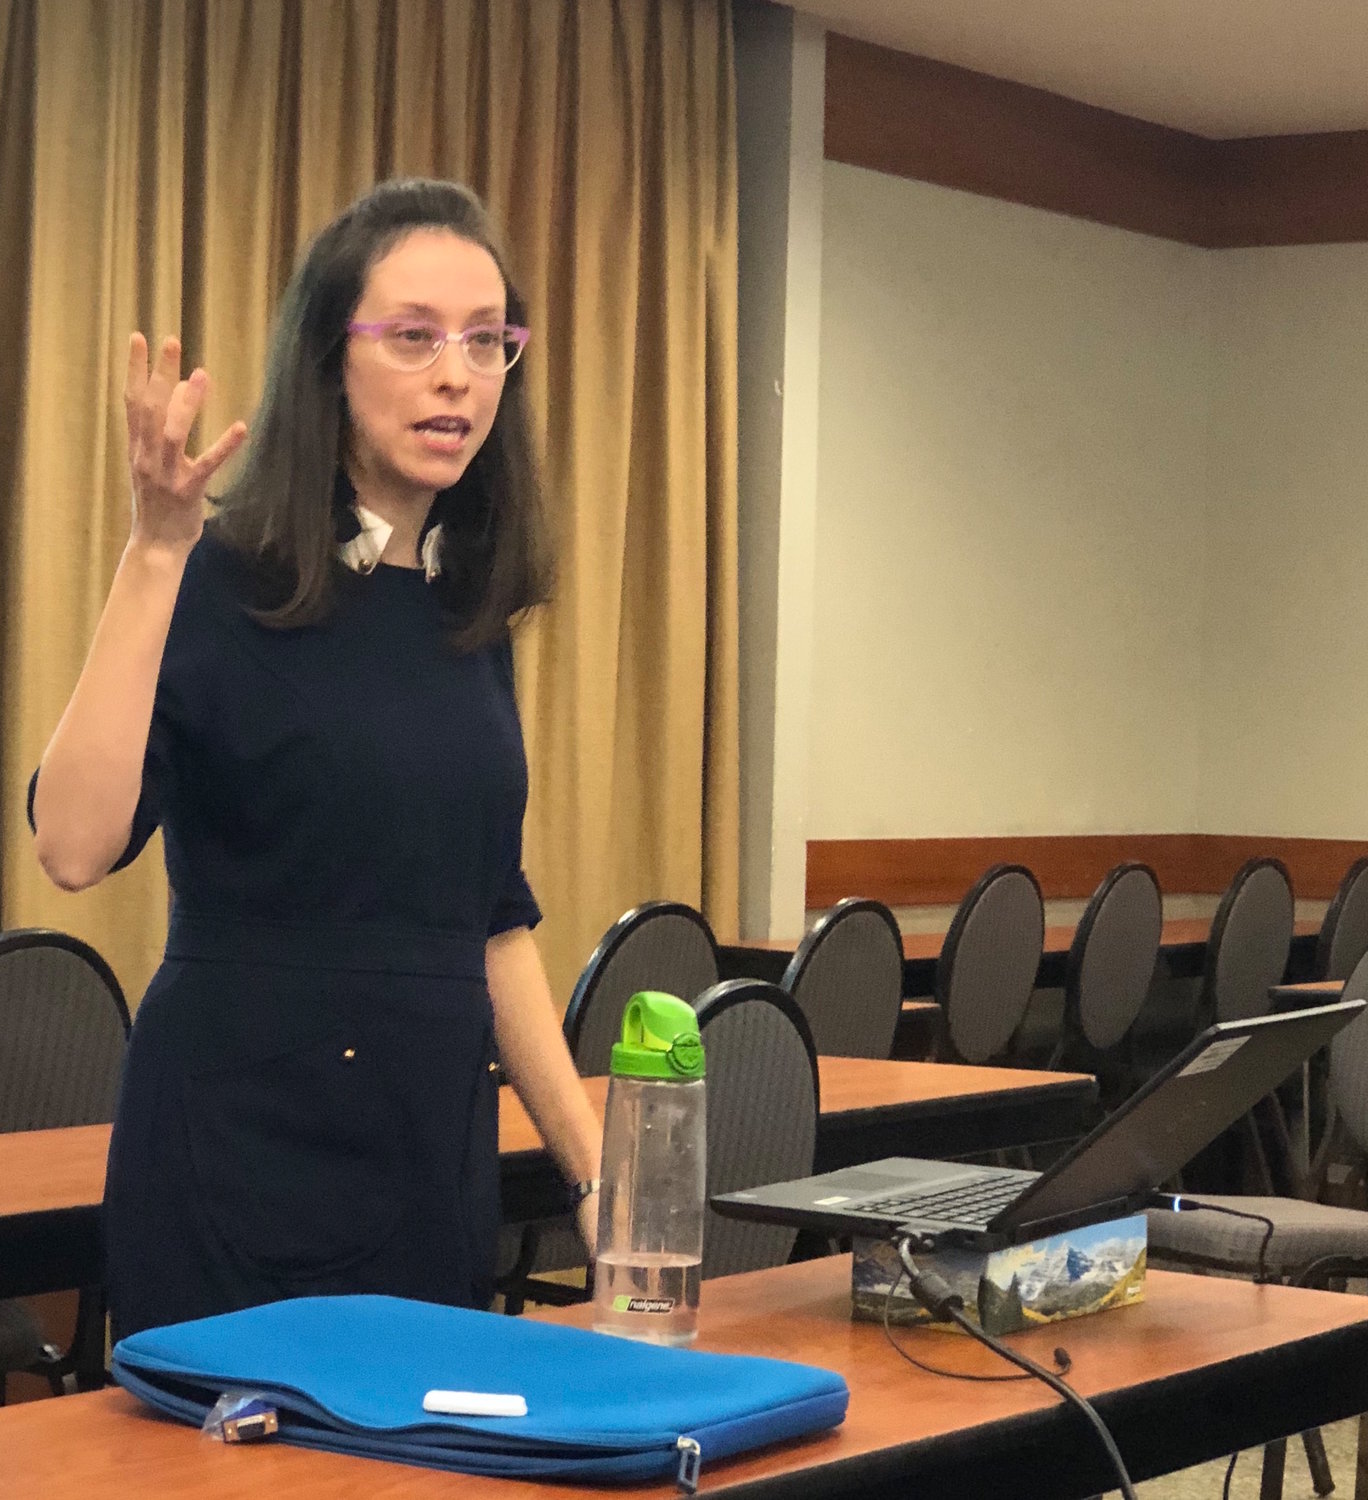 Sacred Spaces founder and CEO Shira Berkovits discussed child abuse to help kick off Aleinu: A Safeguarding Children Campaign at Young Israel of Woodmere on Oct. 30.